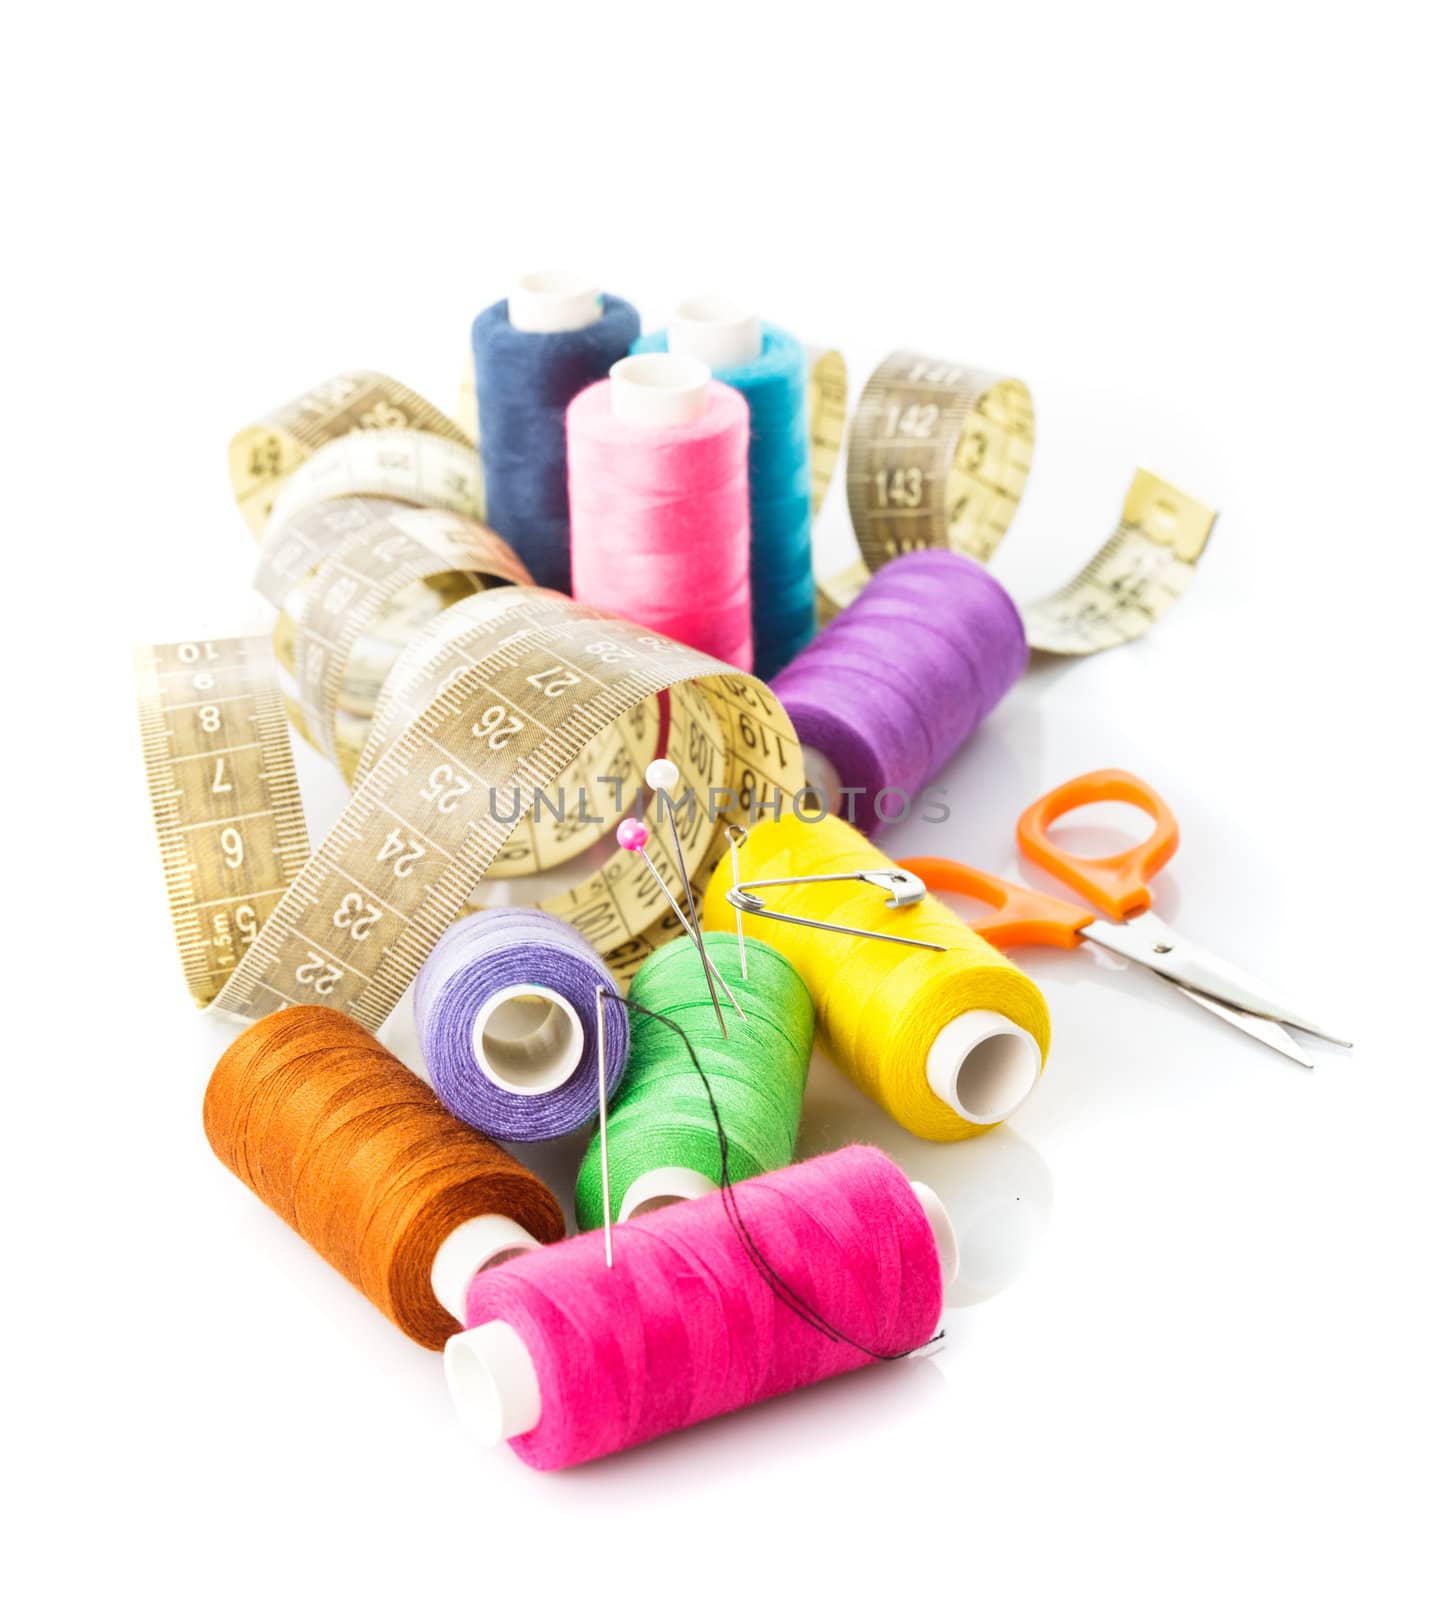 Sewing items by oksix